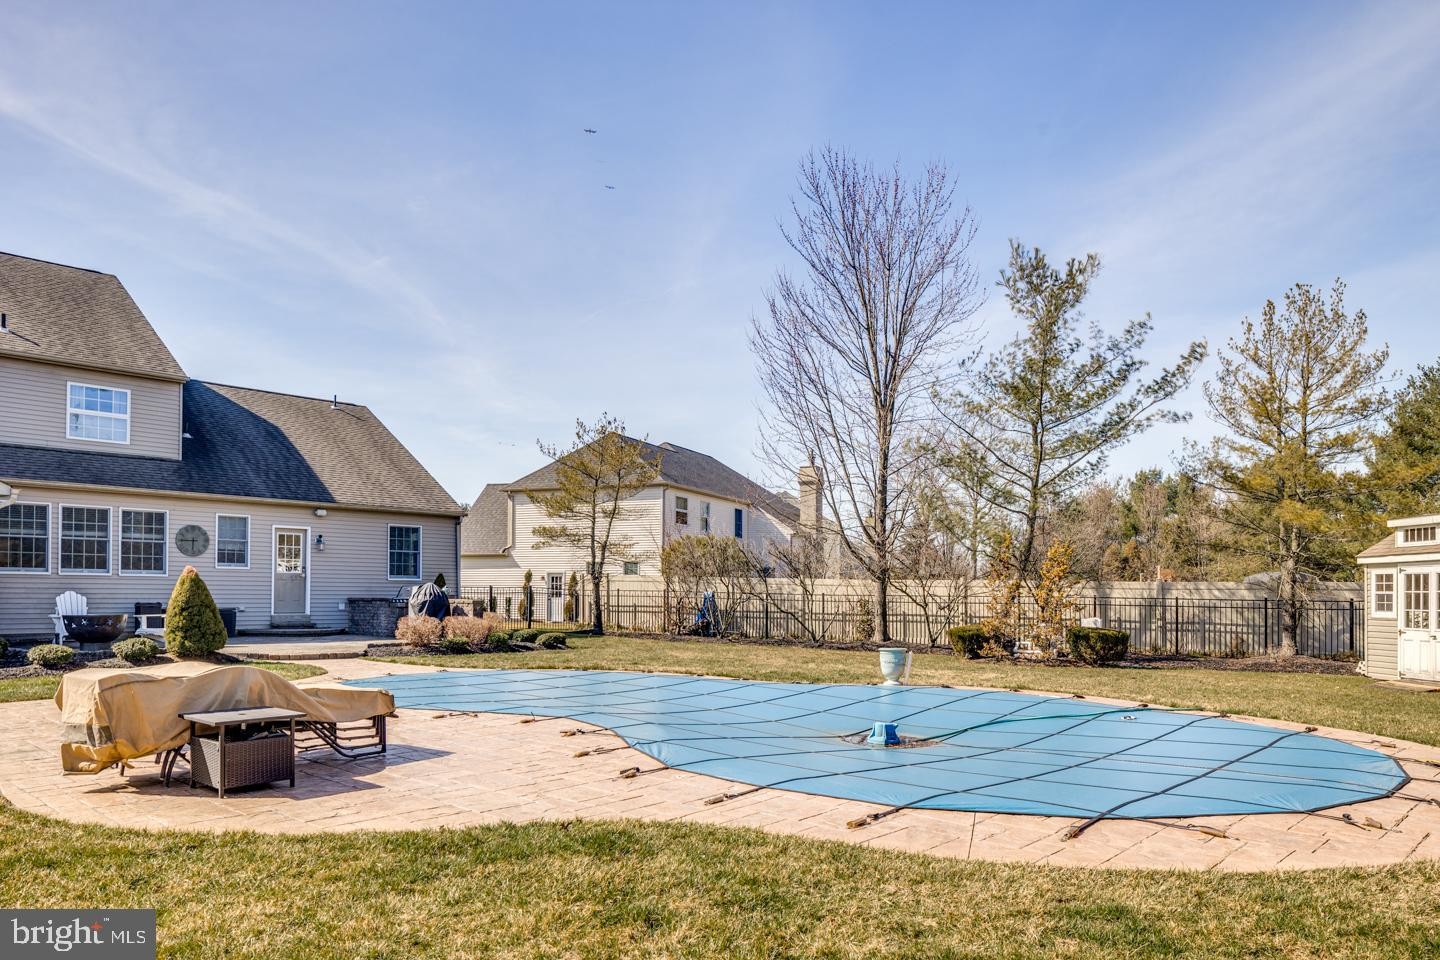 43. 3 Bellwether Ct